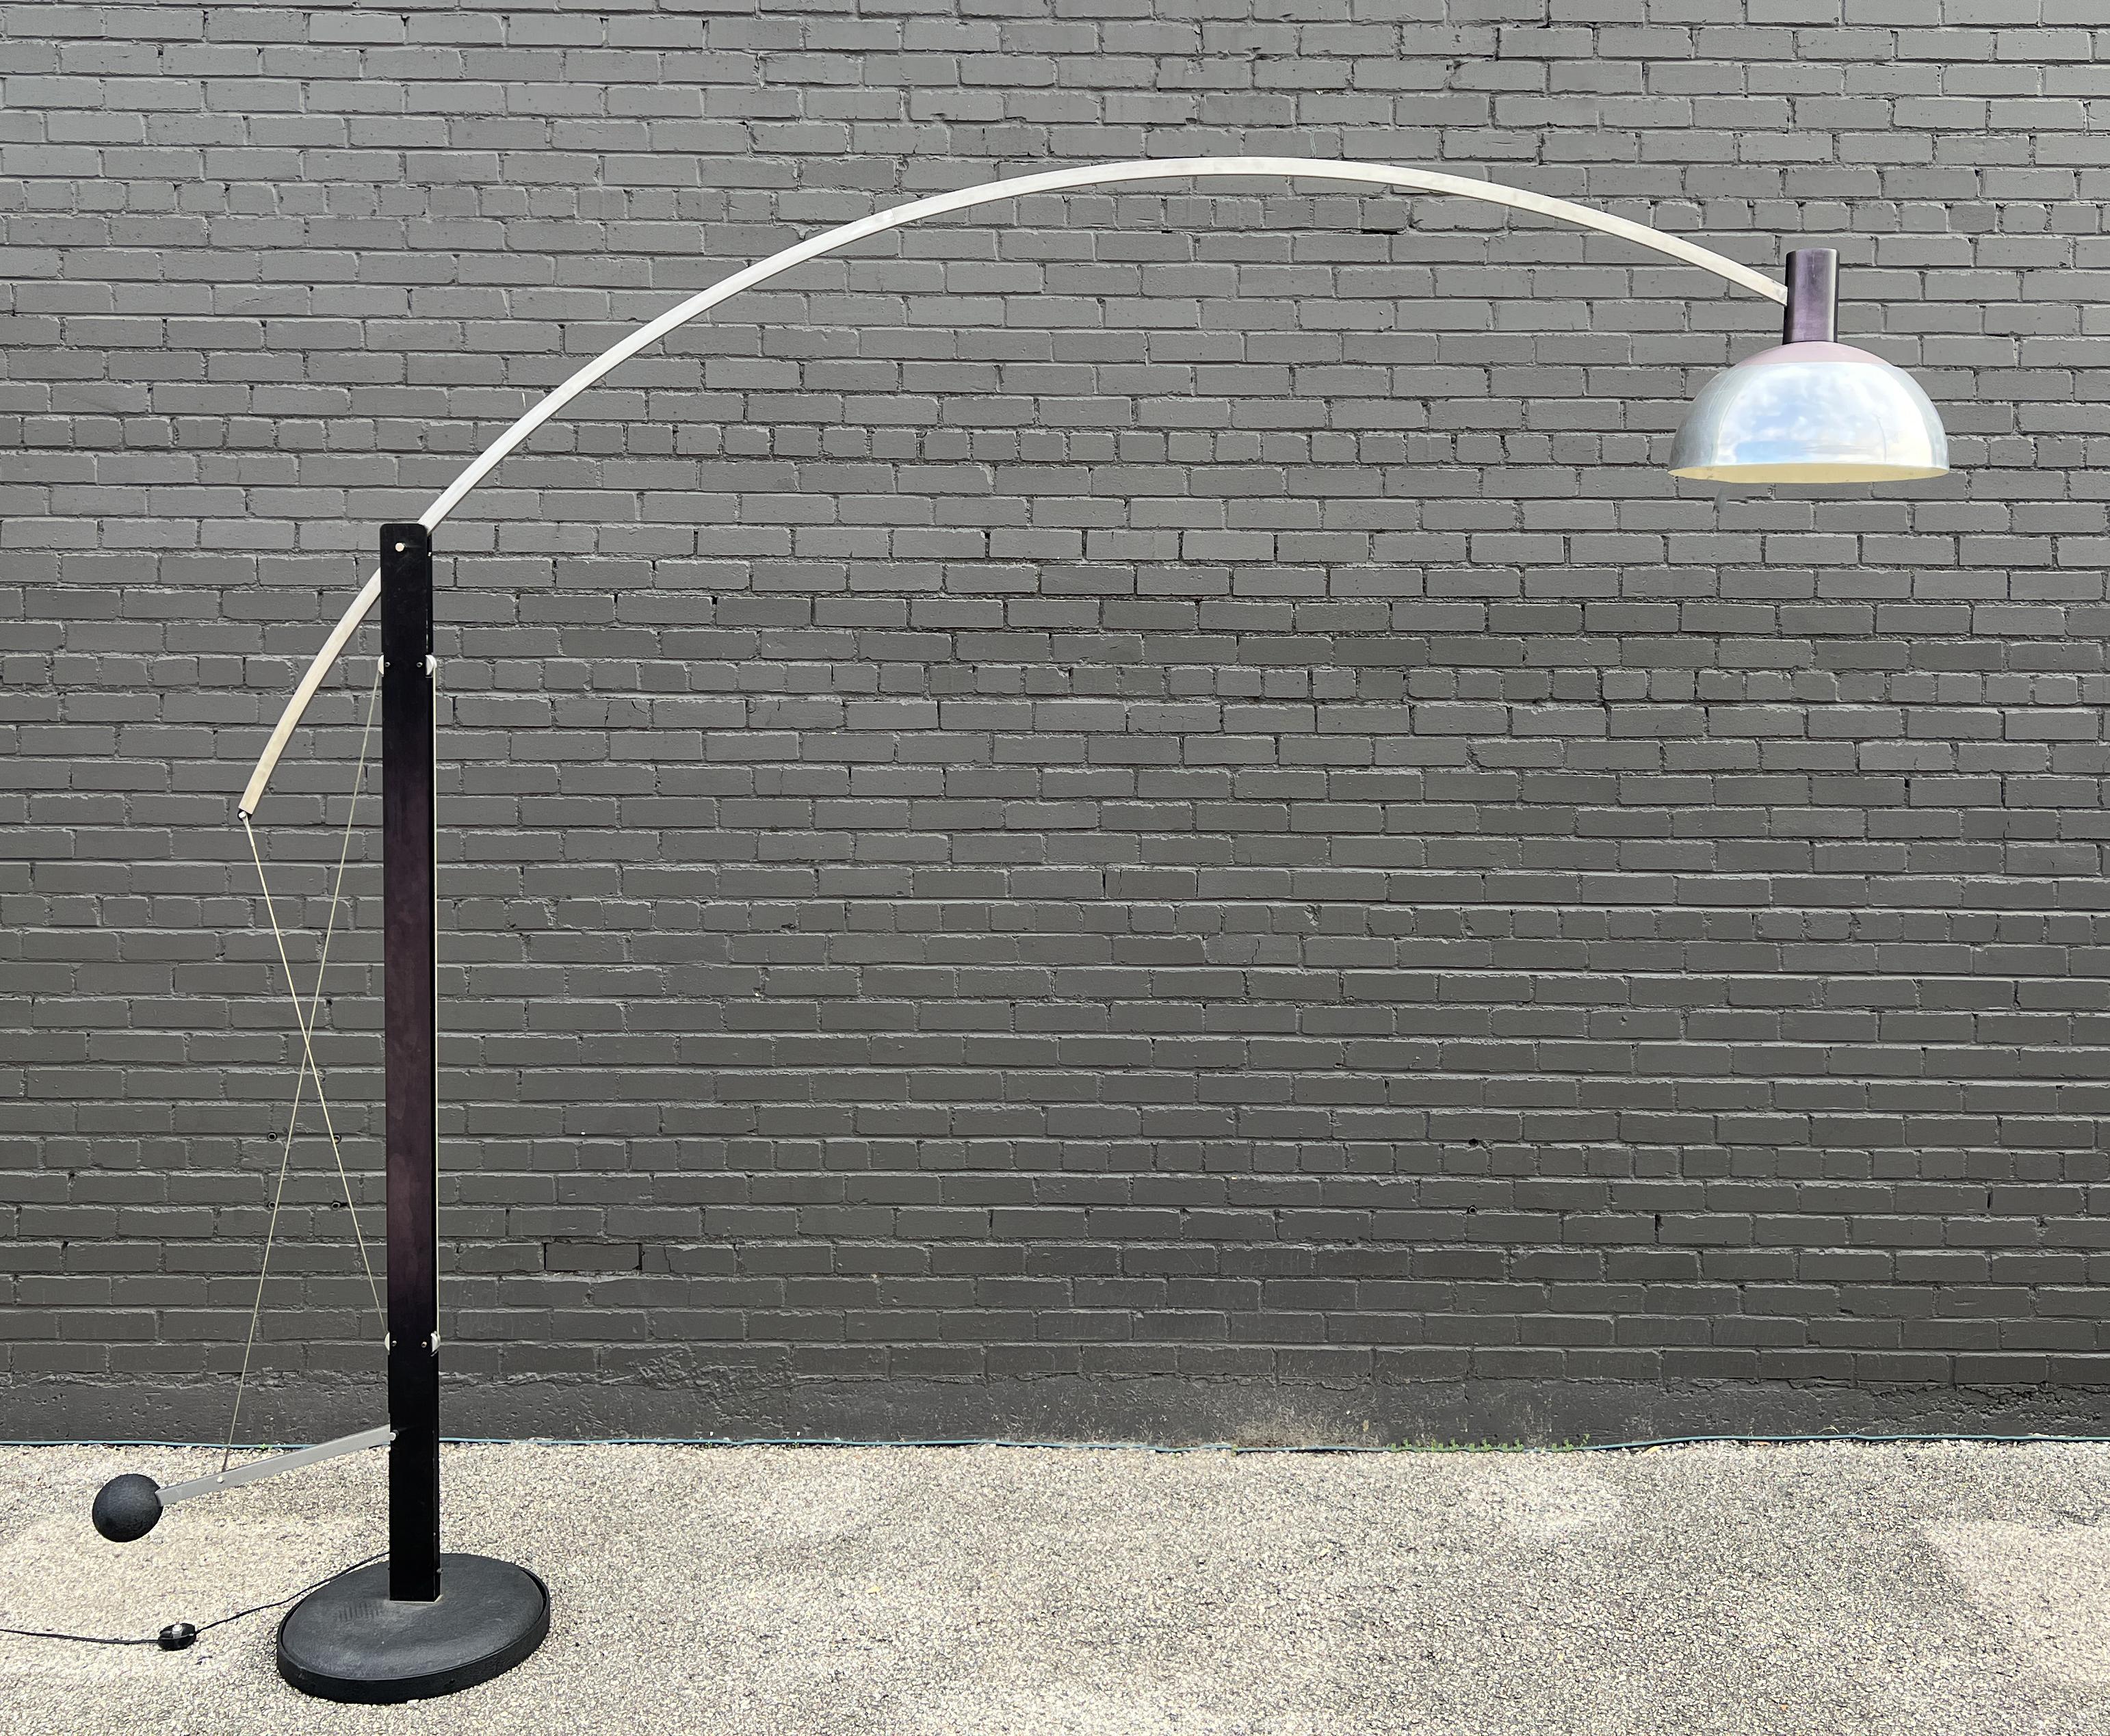 Rare, architectural arching lamp titled 